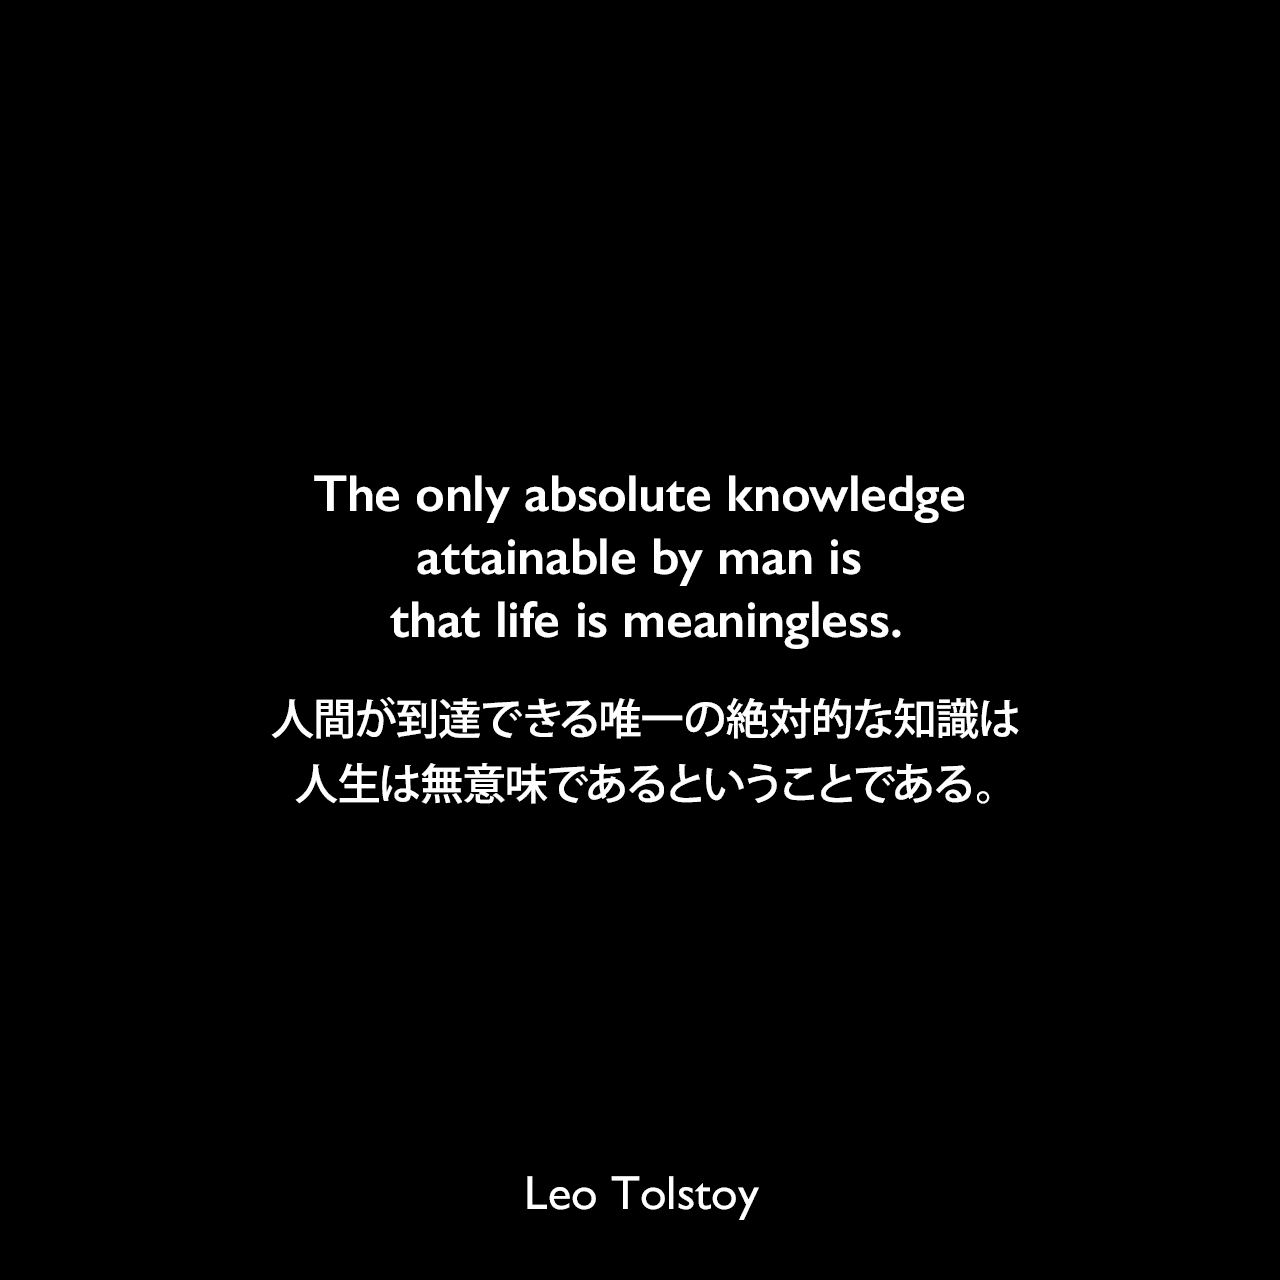 The only absolute knowledge attainable by man is that life is meaningless.人間が到達できる唯一の絶対的な知識は、人生は無意味であるということである。- トルストイによる小説「懺悔」よりLeo Tolstoy